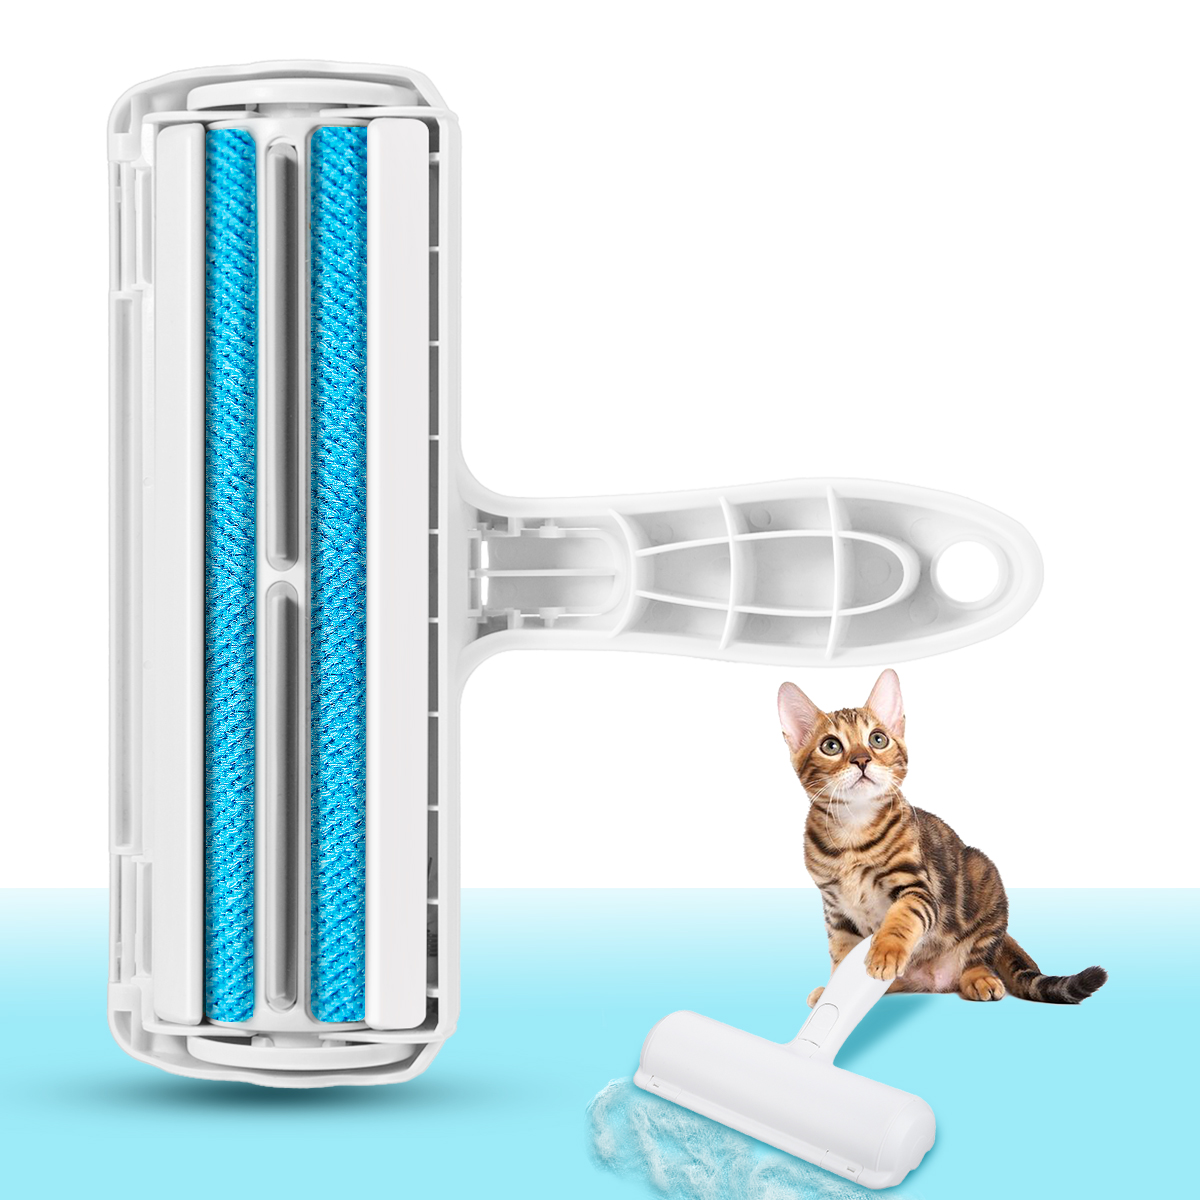 Pet-Hair-Remover-Roller-Self-Cleaning-Dog-Reusabl-Cat-Hair-Remover-Fur-Clothes-Lint-Remover-Roller-1622253